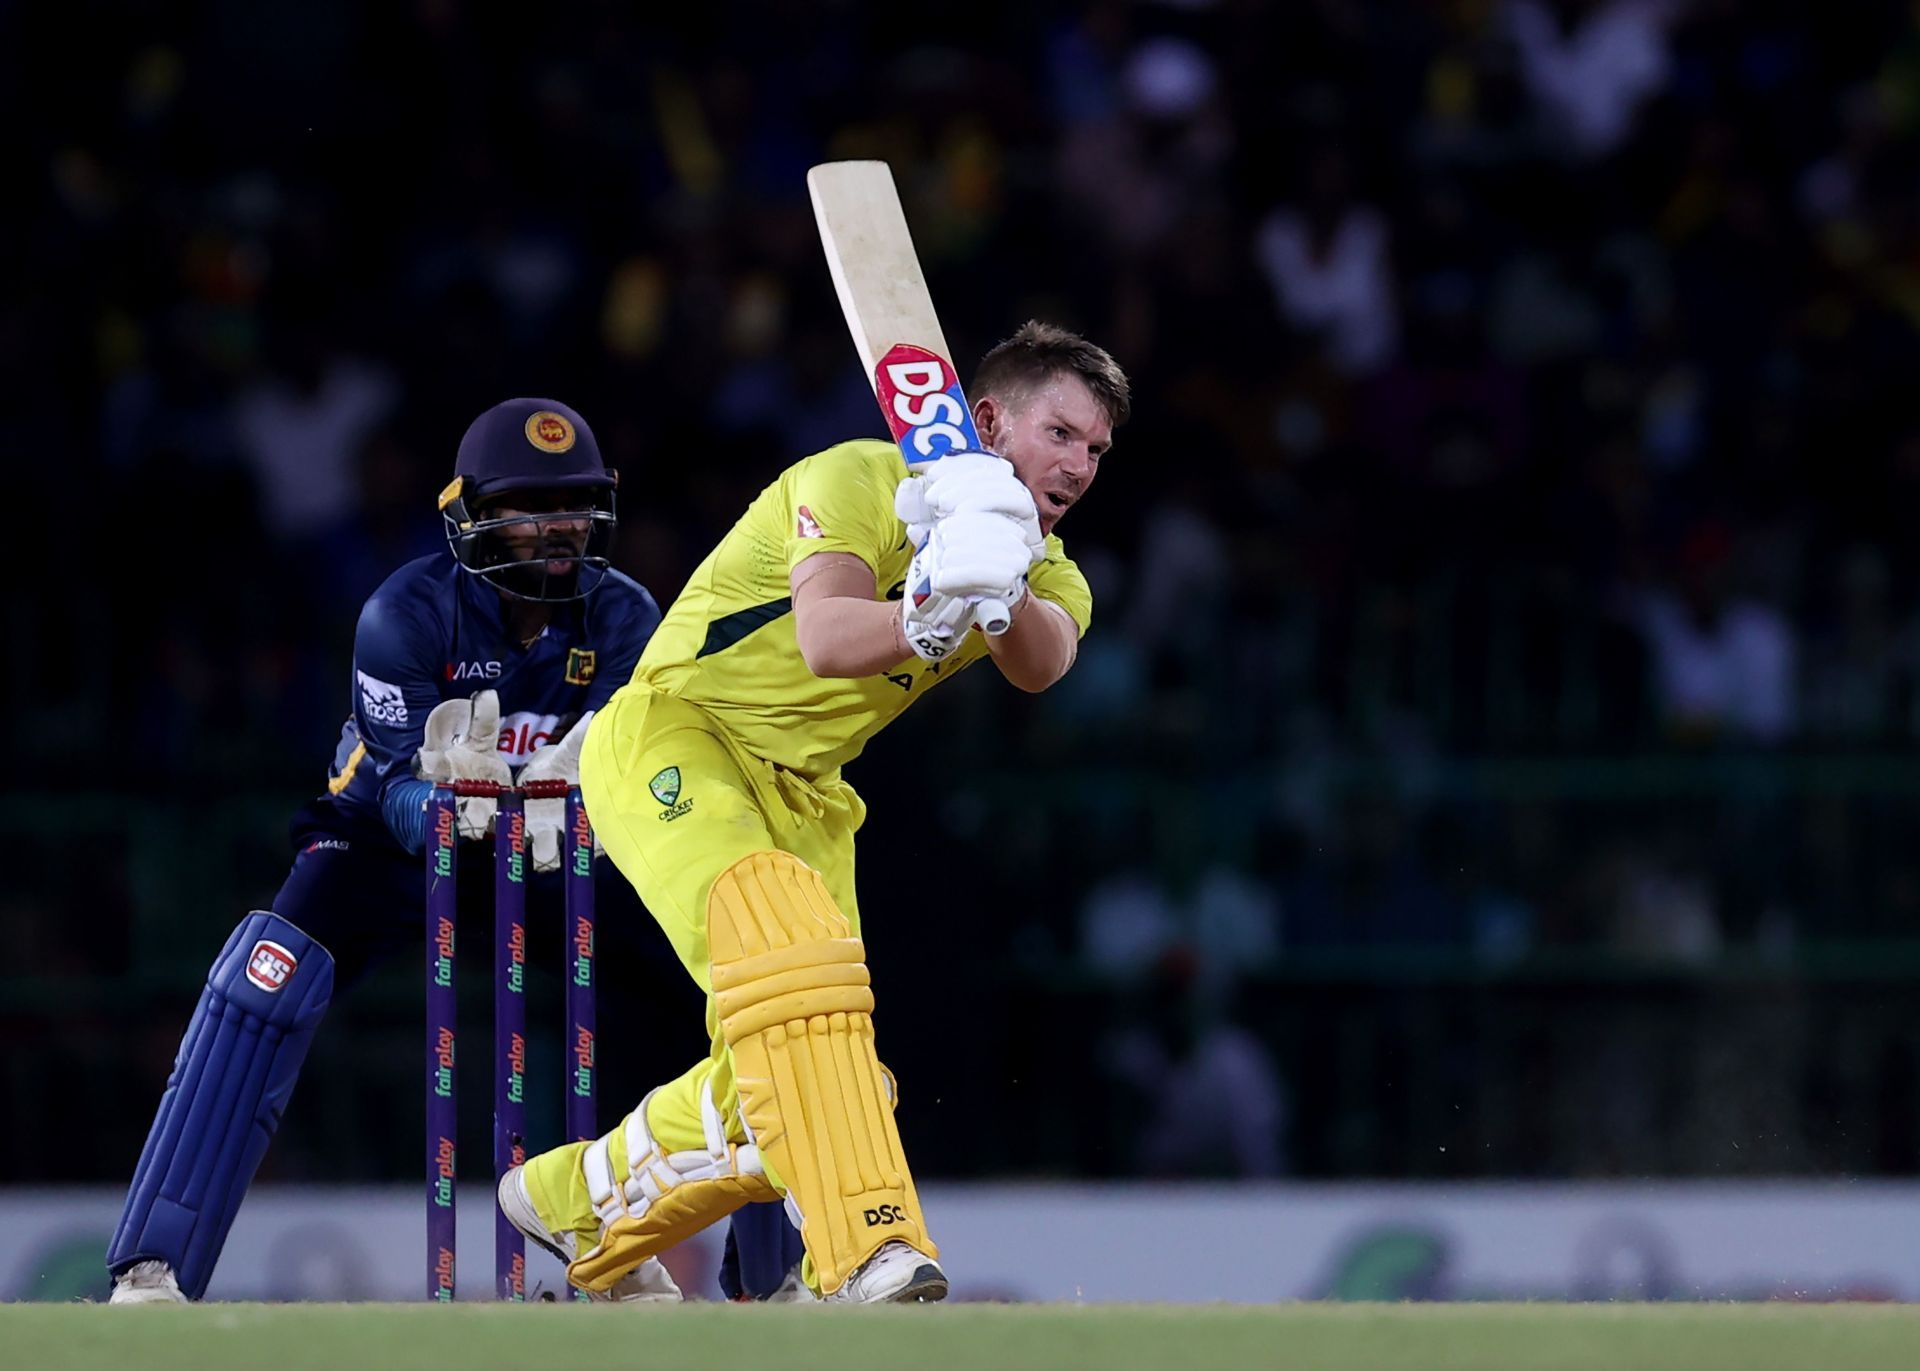 David Warner is considered a dangerous batter across all formats of the game